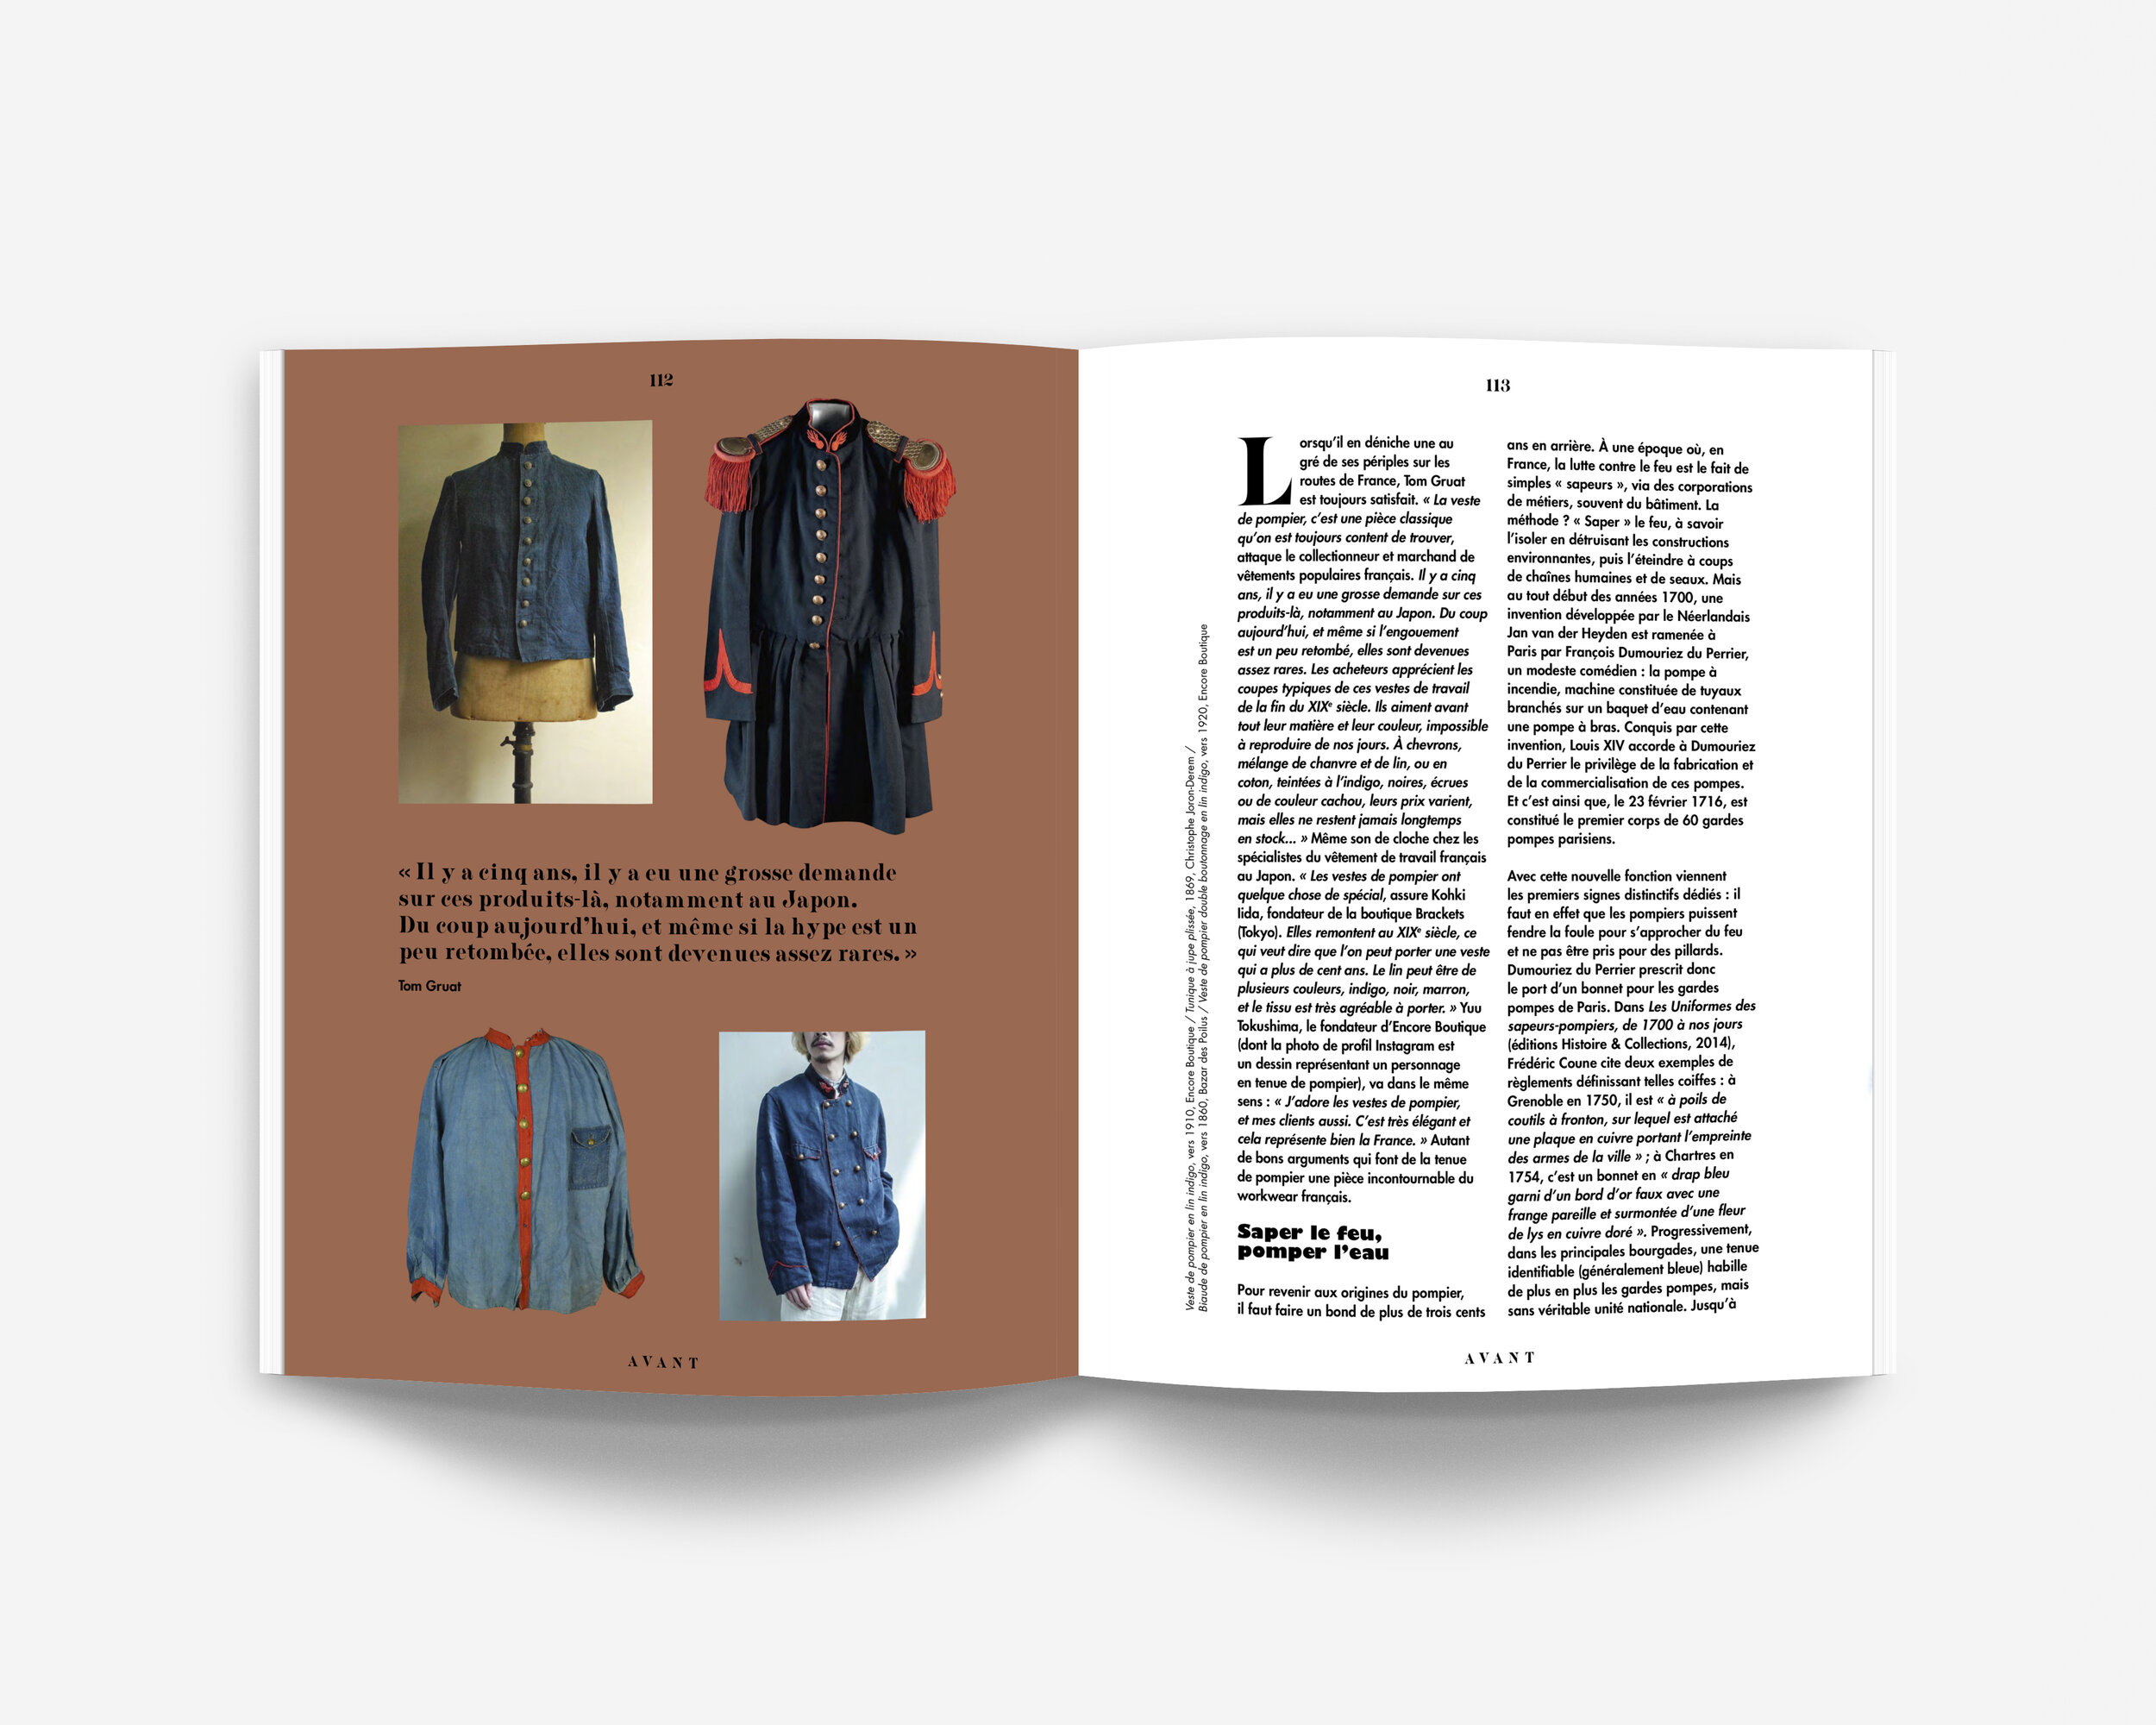 The book of French Workwear — AVANT